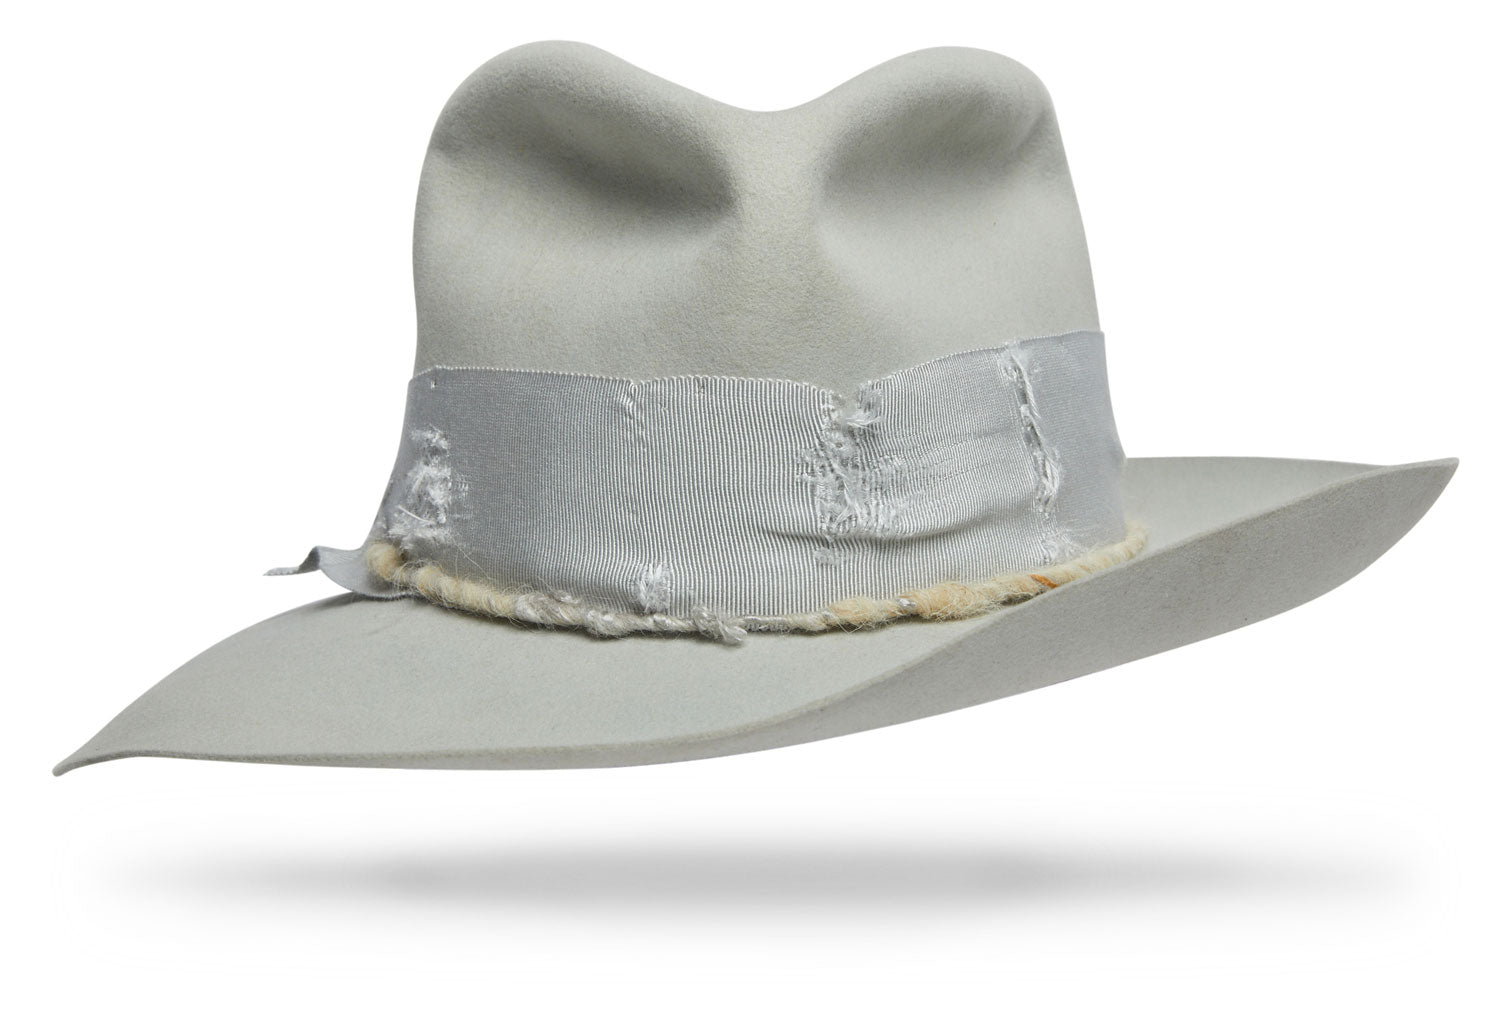 Design
With style and endurance, this Silver belly fur felt hat will make a statement anywhere you go. With its 3 ½ brim and 4” crown and a sharkskin finish that gives it a polished luster, the Charley is adorned with a 2”tone on tone distressed cotton grosgrain and finished off with an alpaca hand-rolled cord.
Material
100% Dressed Beaver fur felt hat sustainably acquired
Specifications
- 2 ¾” brim and 4” crown made of 100% Beaver fur Felt sustainably acquired- Silver belly color - Adorned with a 2 tone on tone distressed cotton grosgrain - Finished of with an alpaca hand-rolled cord- Handmade in our atelier in NYC with love. 